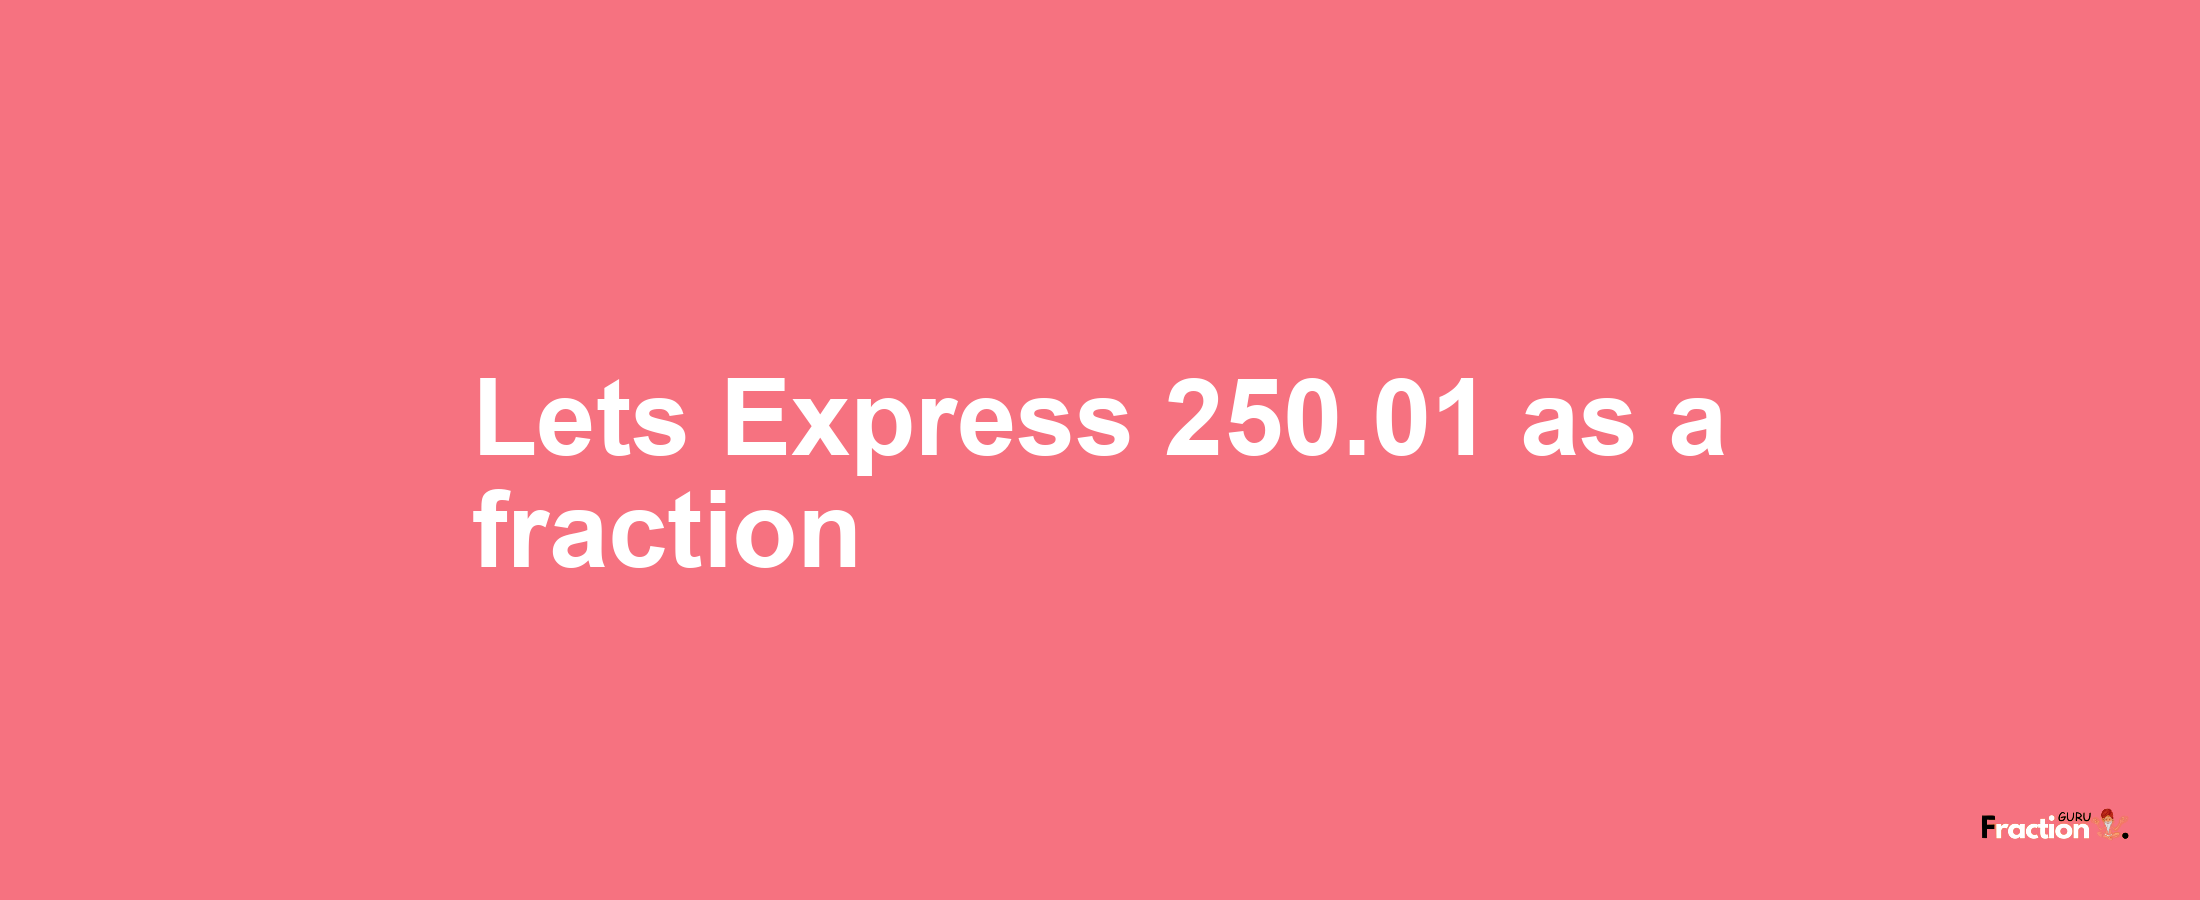 Lets Express 250.01 as afraction